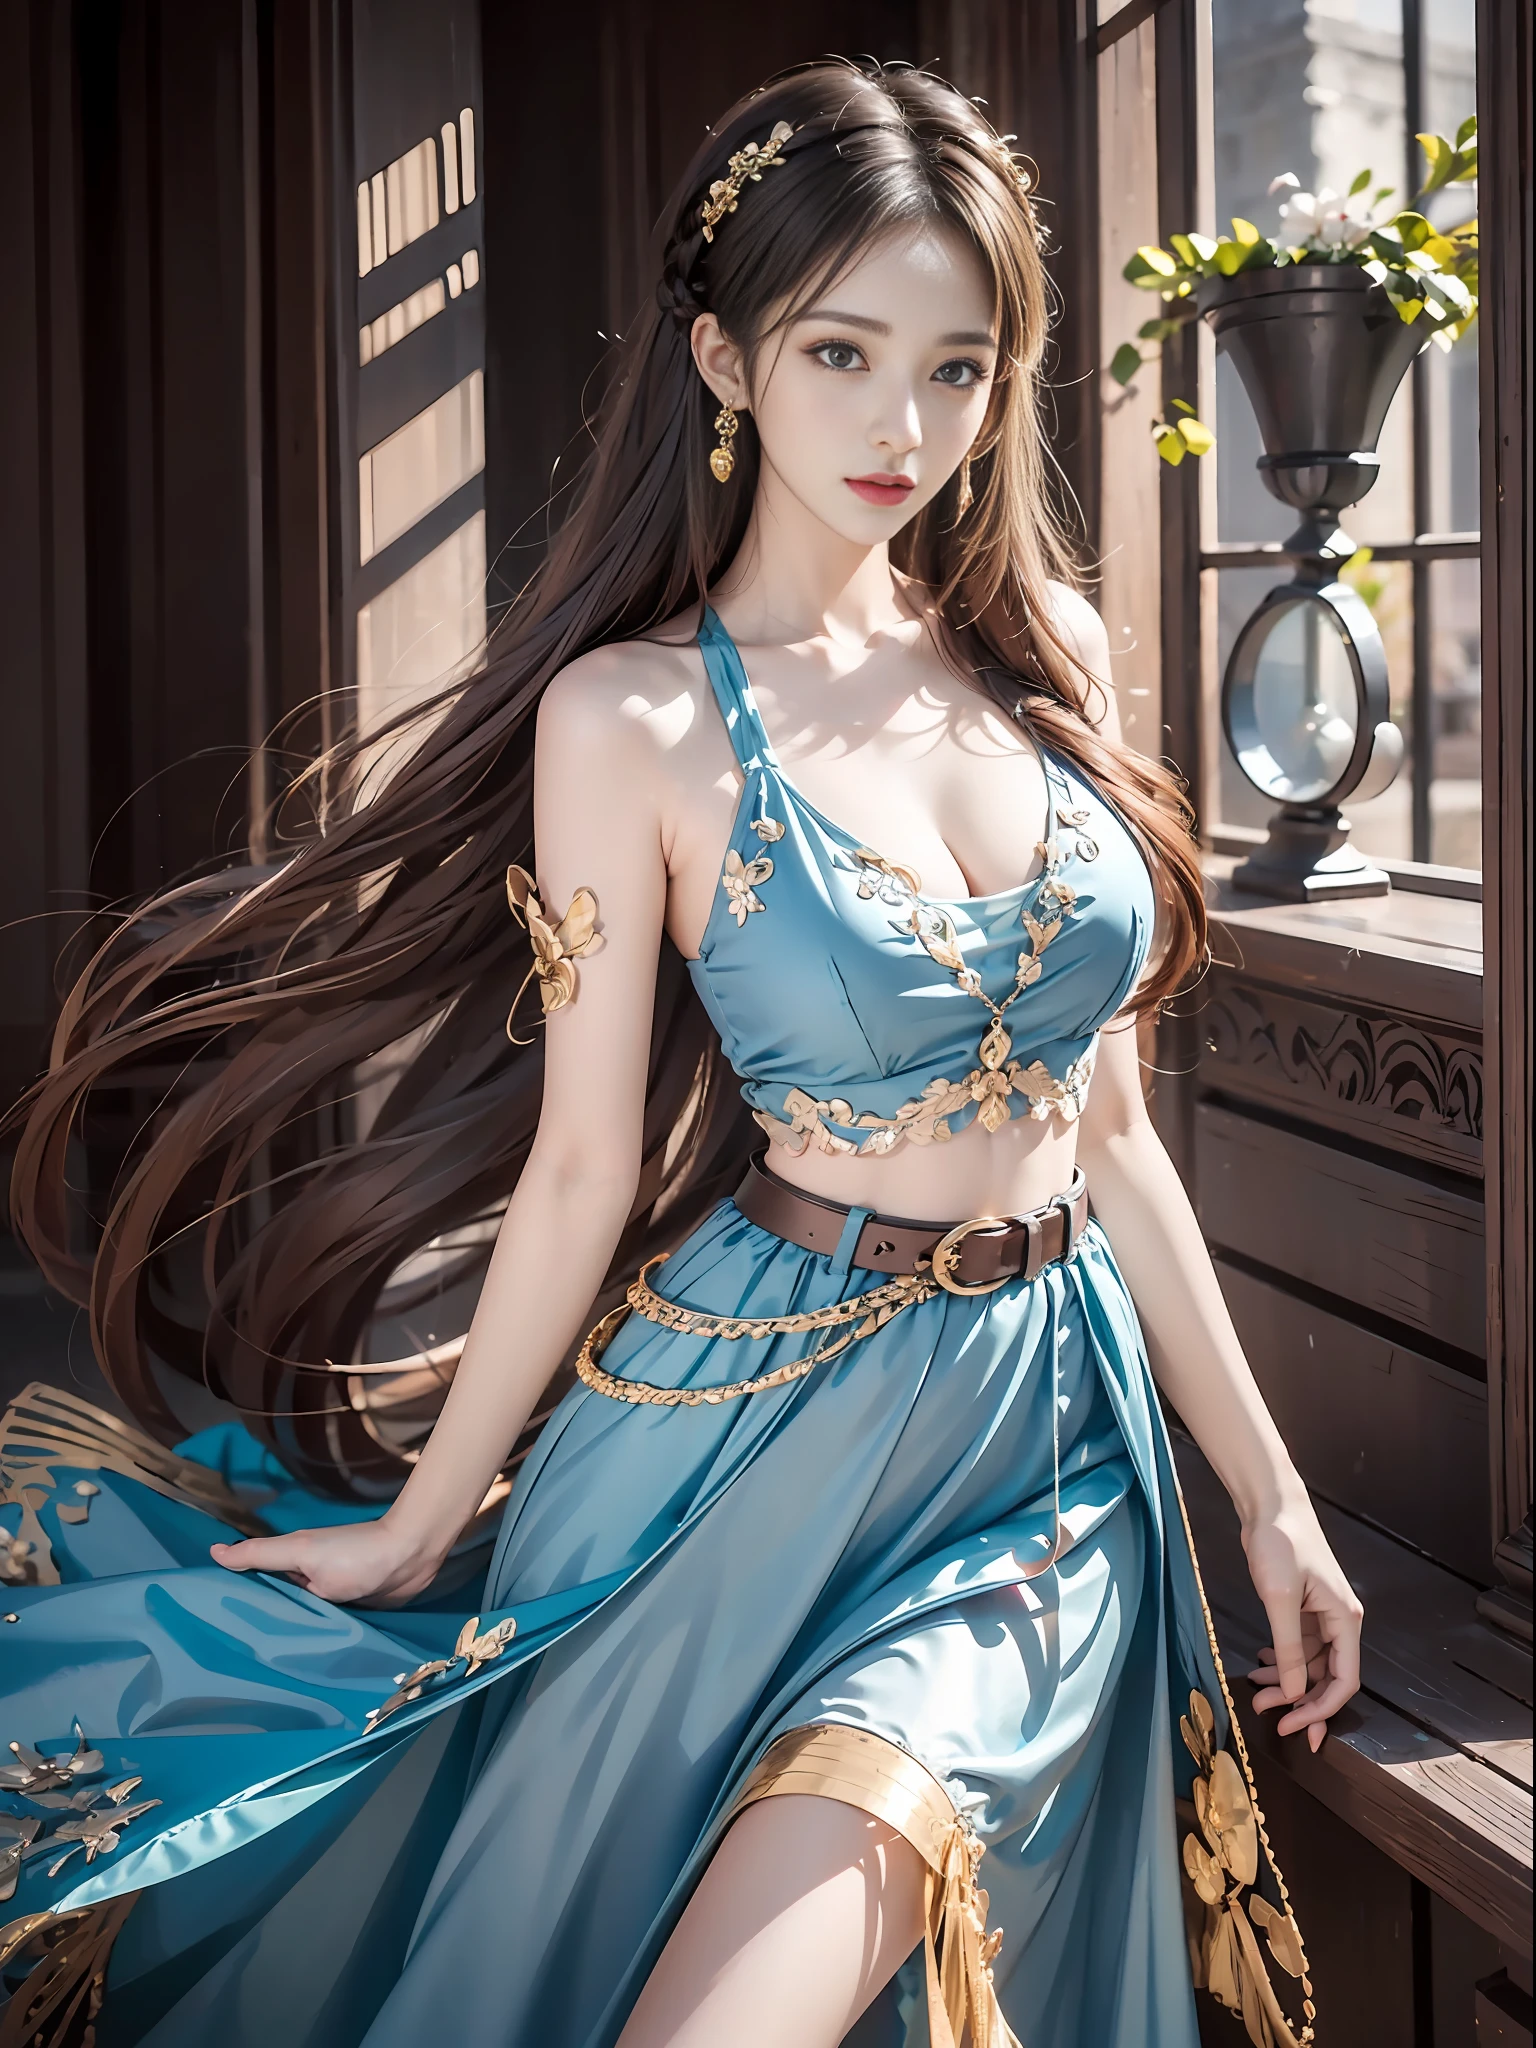 Best quality, best lighting, superb photo, best texture, silver blue flowing long hair, simple braided hair, sensual intellectual cool temperament beauty, red long dress, low-cut tucked outer skirt, ferret hair embellishment, gold exquisite belt, perfect body, pointed long and exquisite hair accessories, sense of atmosphere